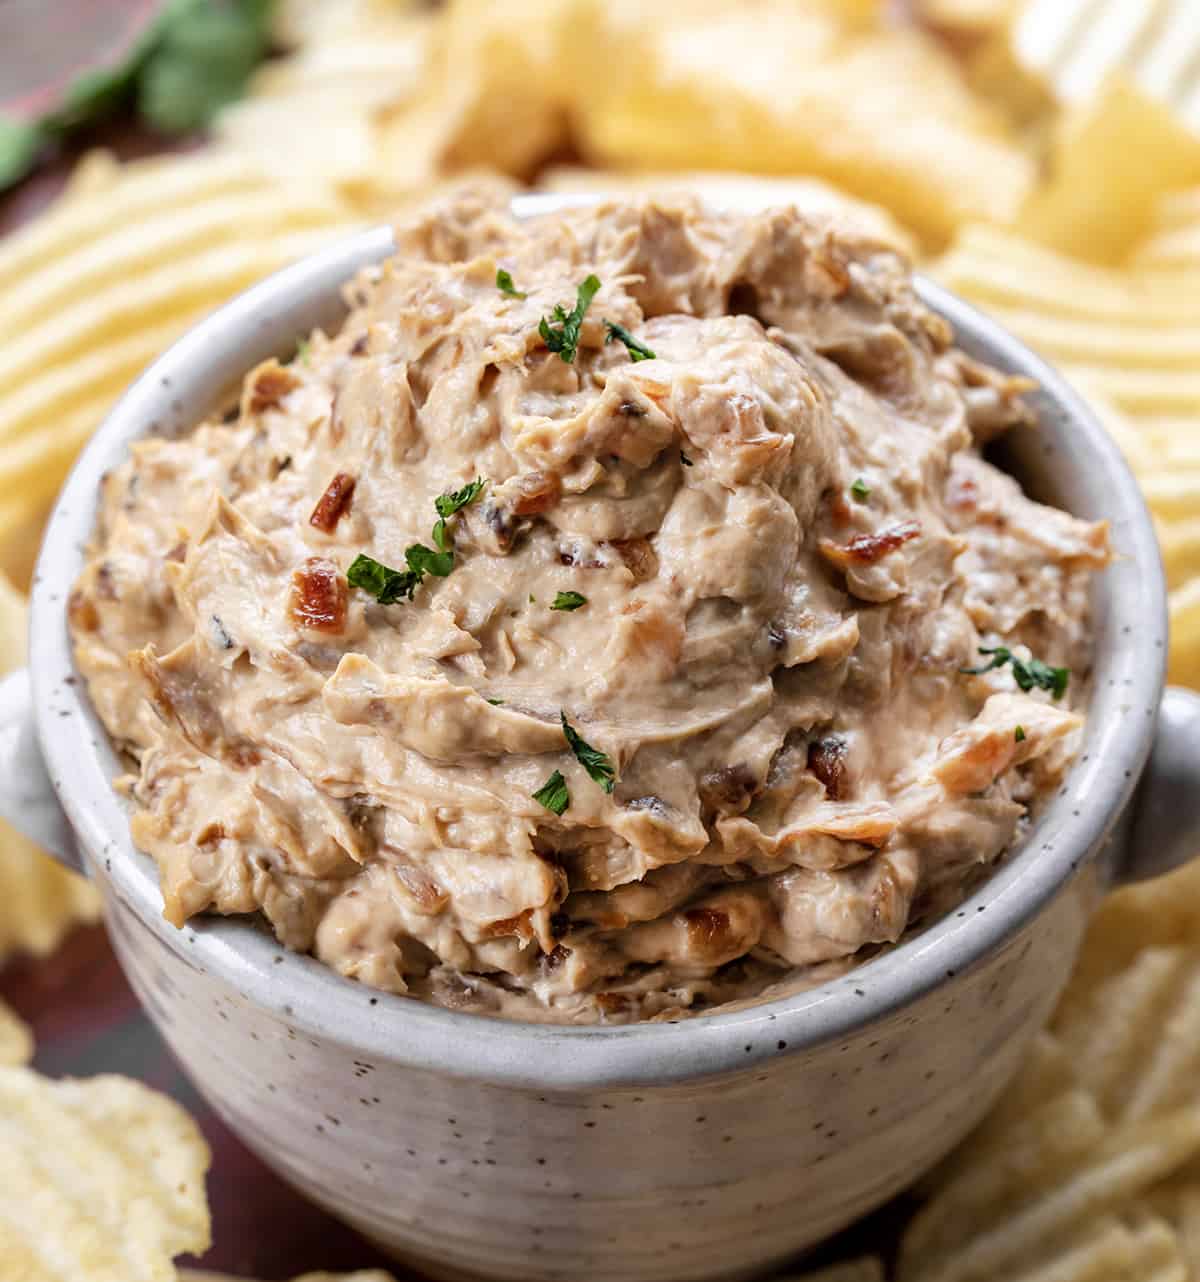 Bowl of Caramelized French Onion Dip with Potato Chips Around It.